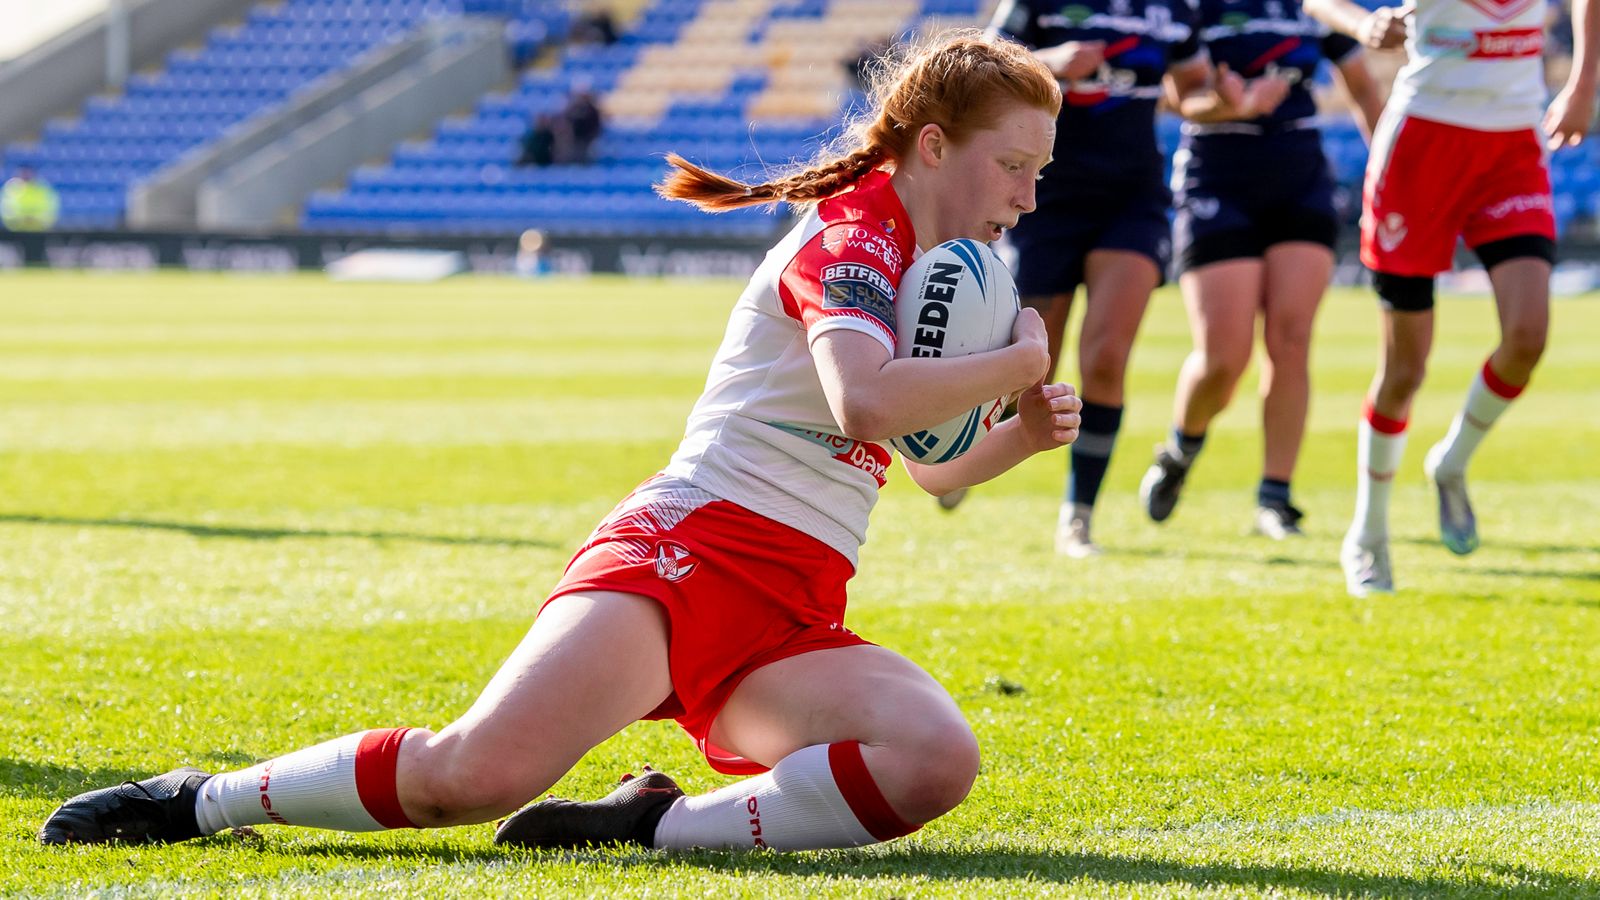 Women’s Super League: St Helens star Rebecca Rotheram on her life in rugby league